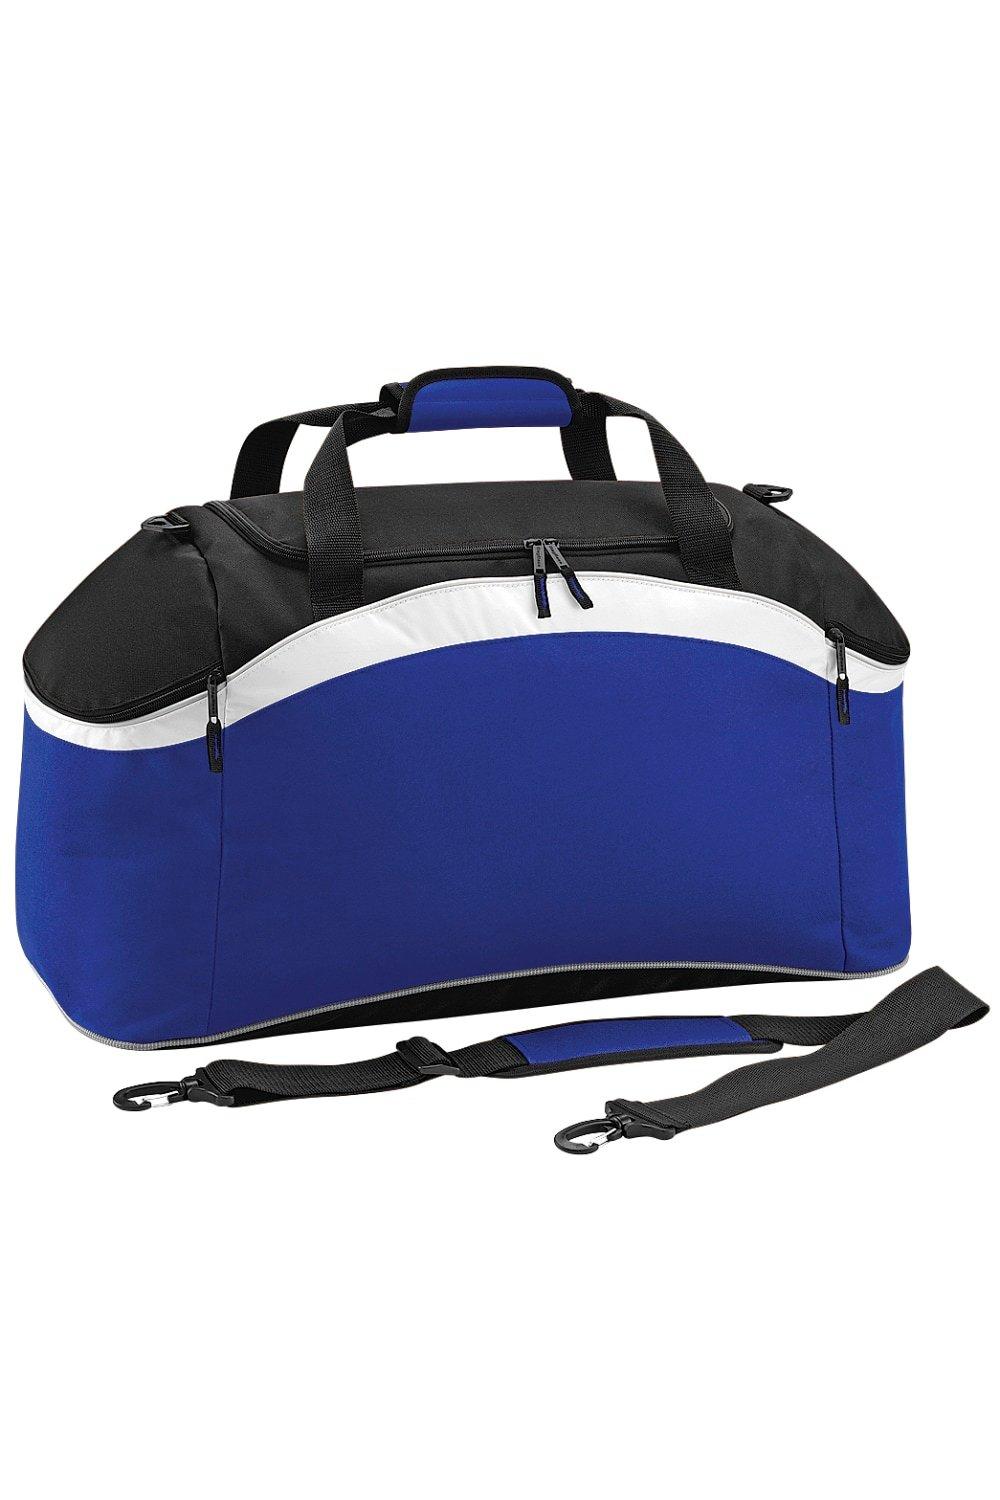 Teamwear Sport Holdall Duffle Bag (54 Litres) Pack of 2